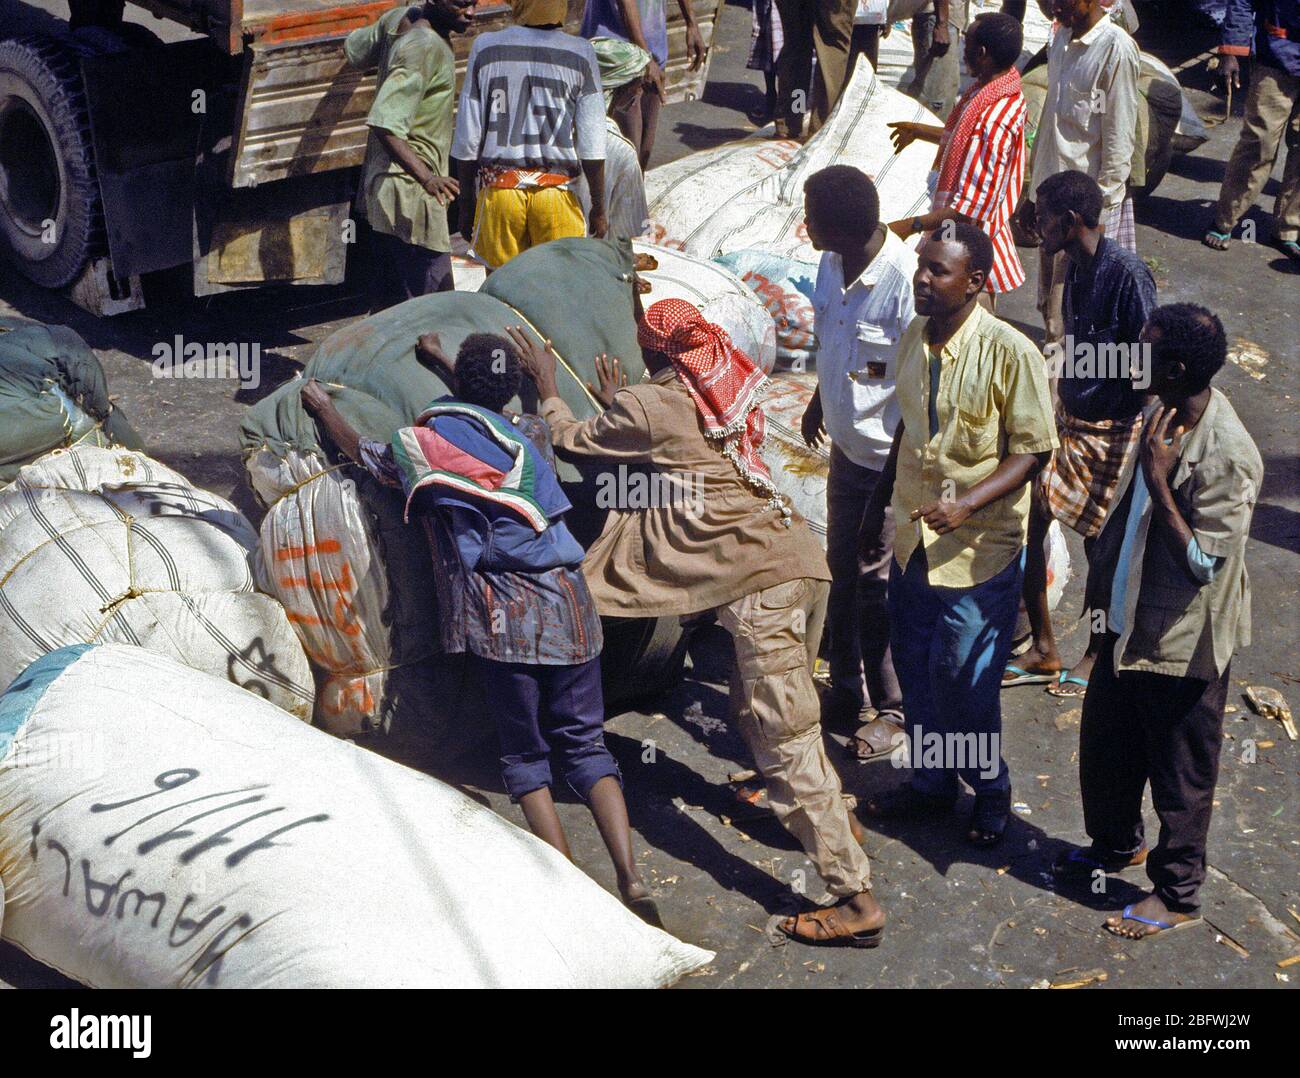 1993 - Somalis off-load rice and other relief supplies from a Saudi Arabian freighter at the seaport.  The Saudis are providing relief supplies to the Somalis under the auspices of UNOSOM II. Stock Photo